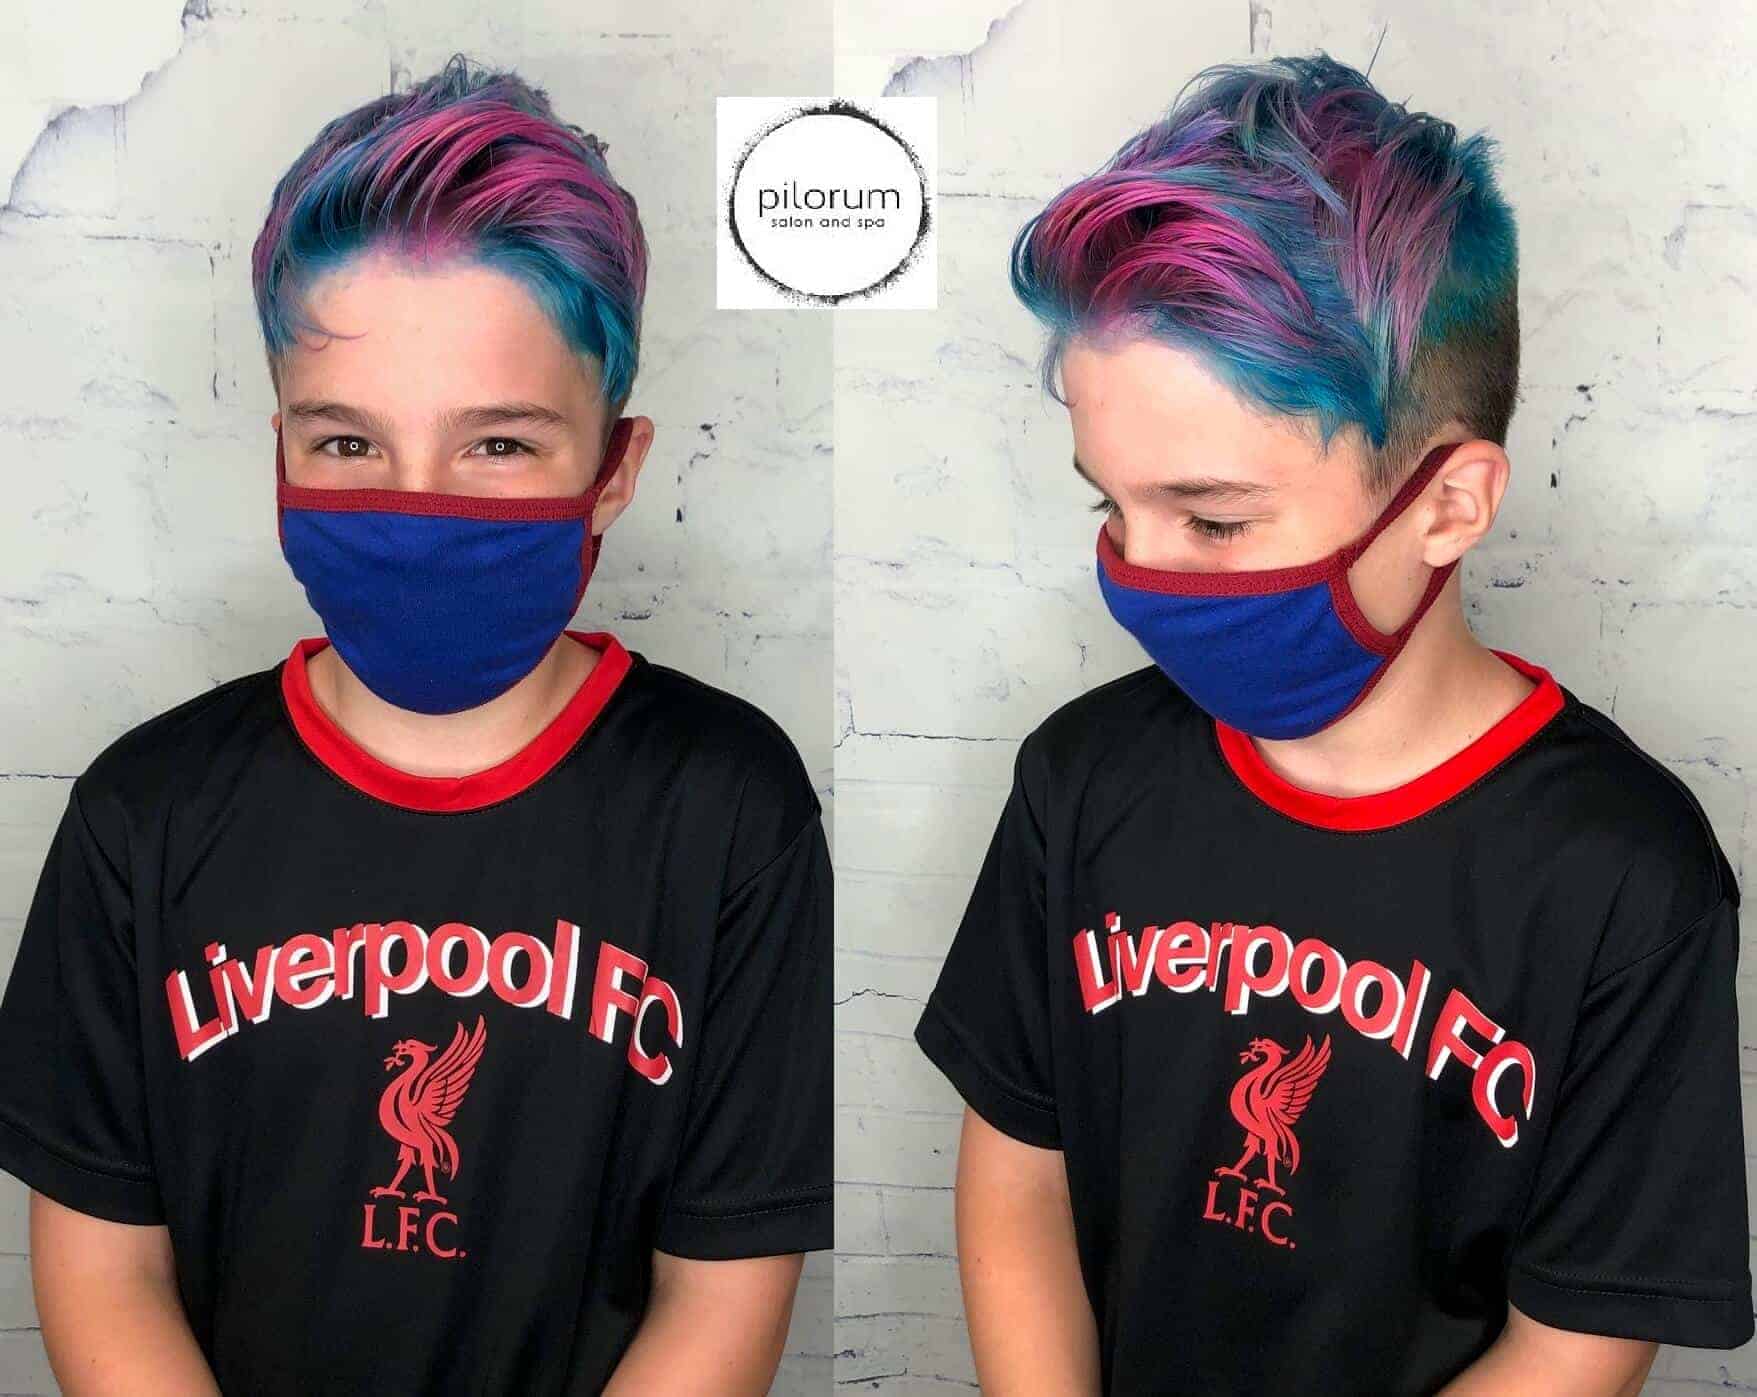 Blue and Pink Hair Boy - wide 4